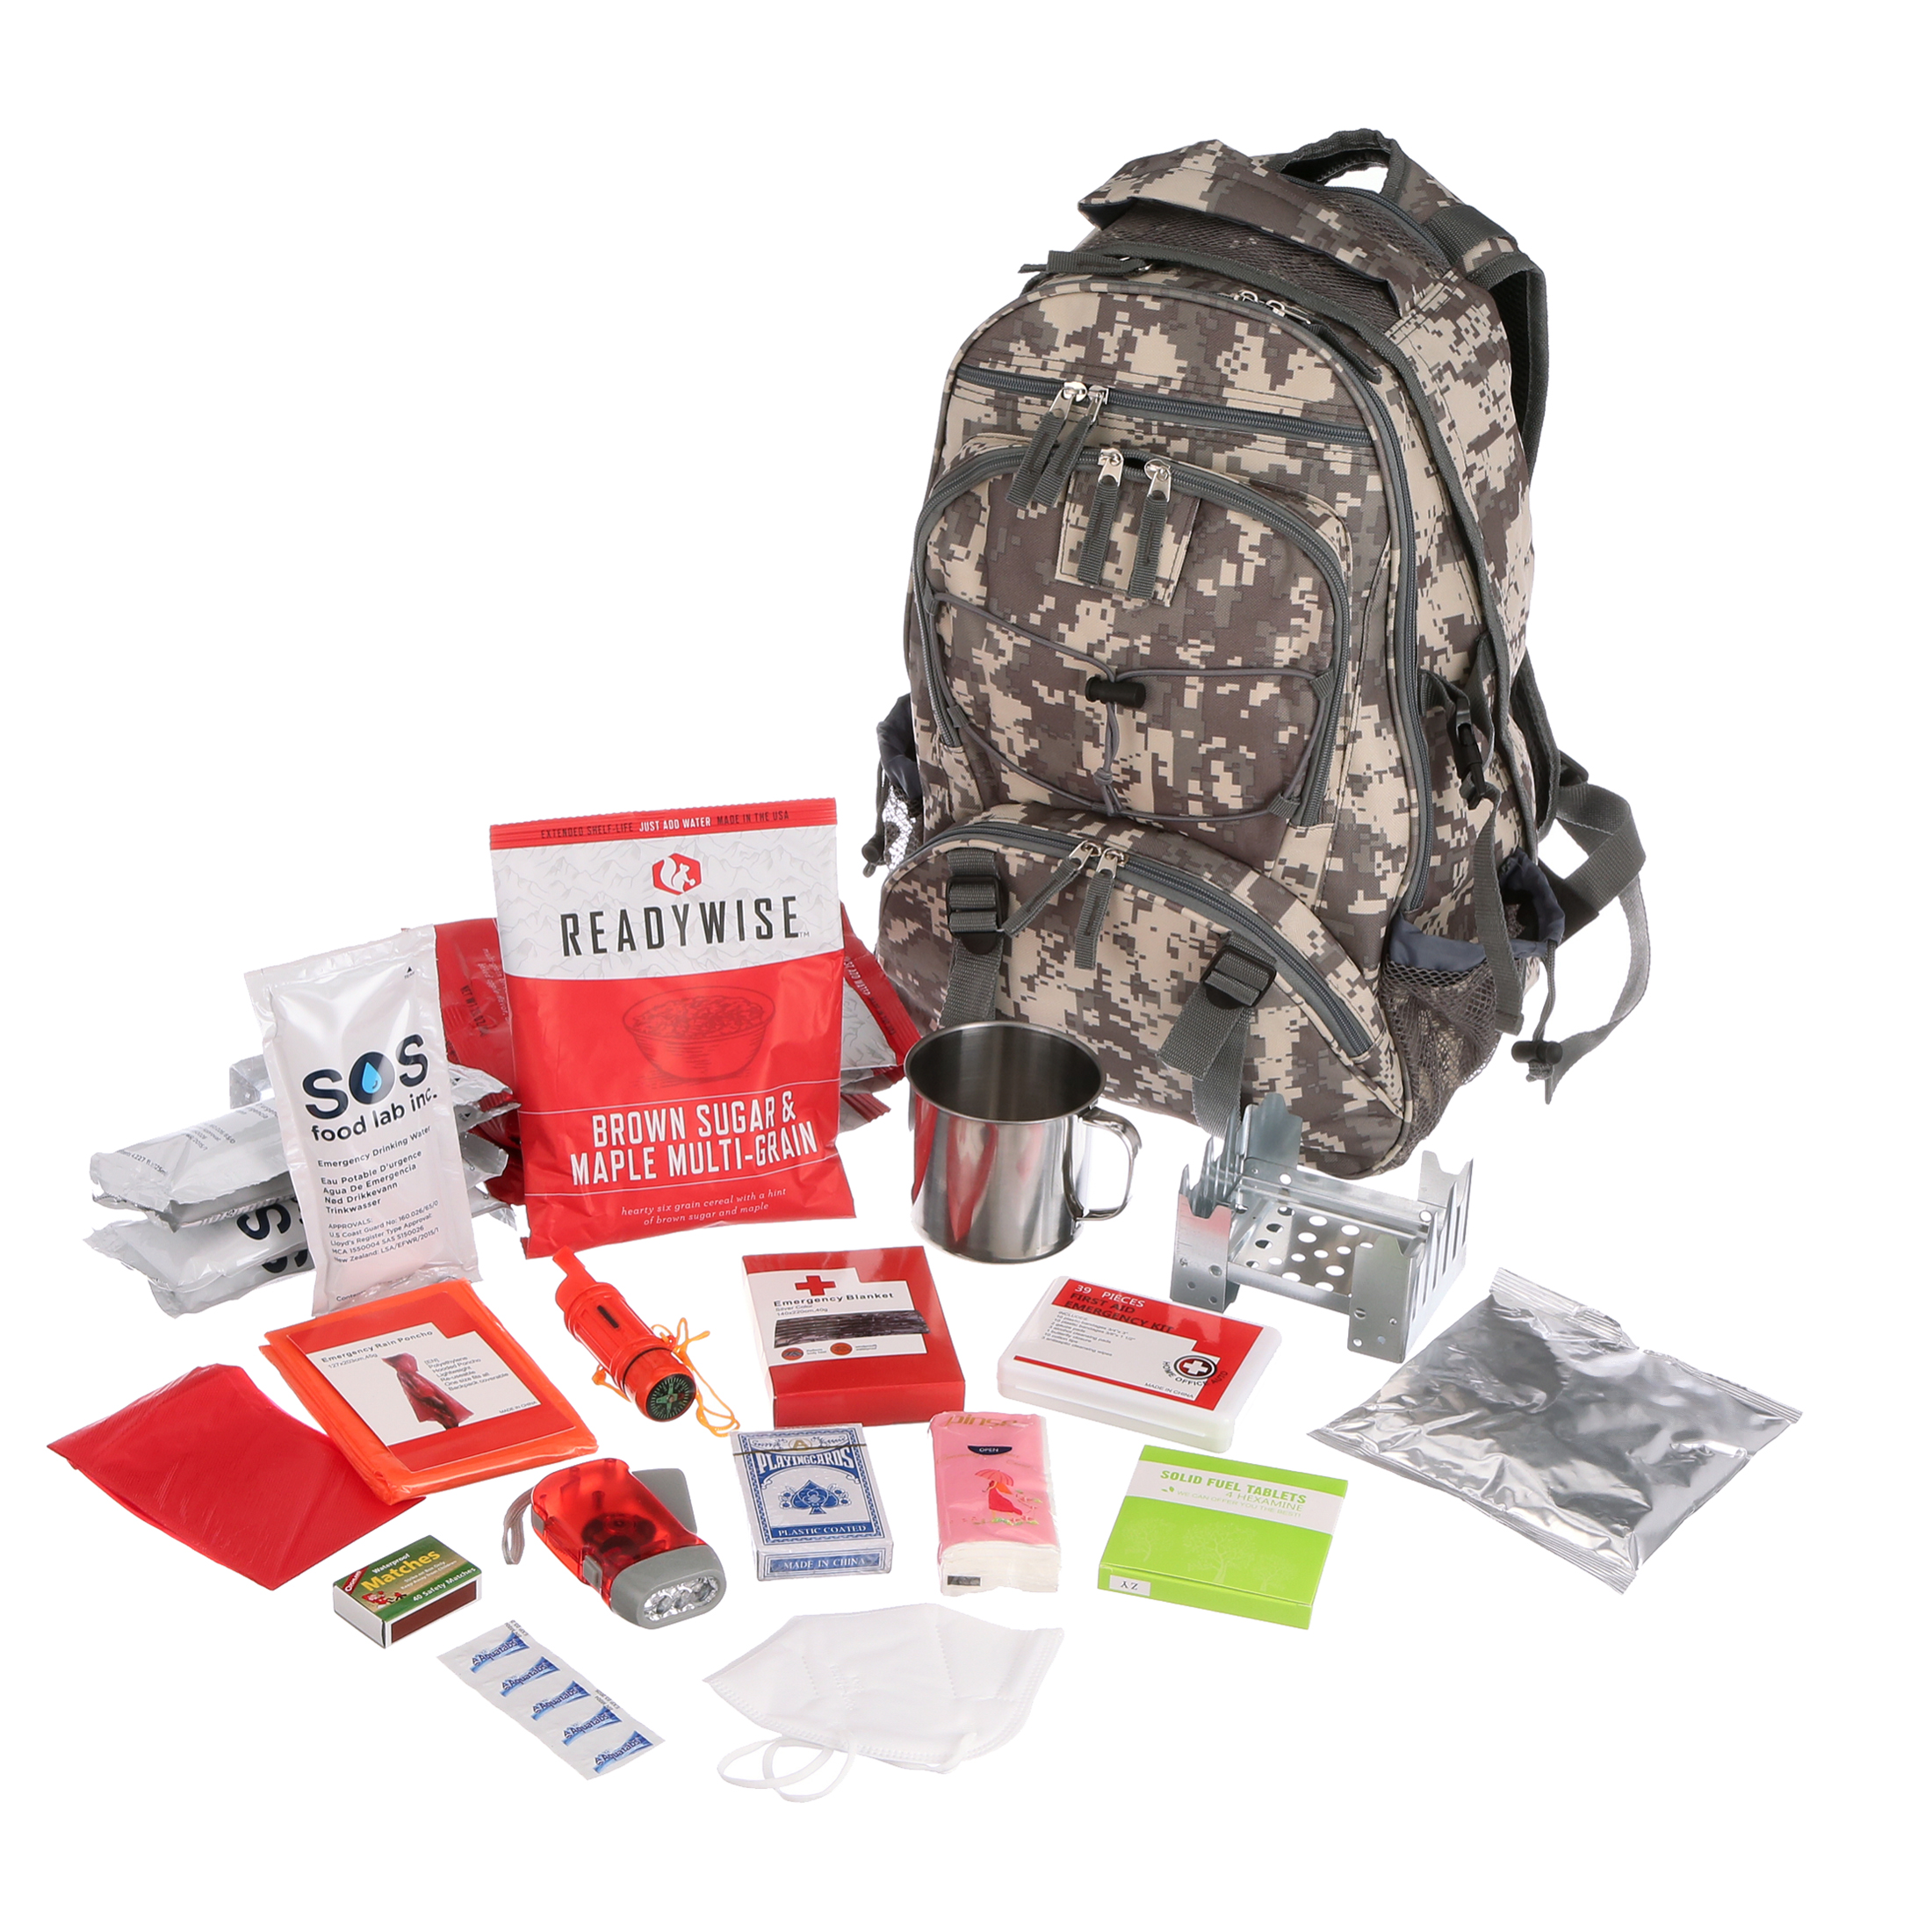 Readywise 5-Day Survival Backpack - Camo - image 9 of 11